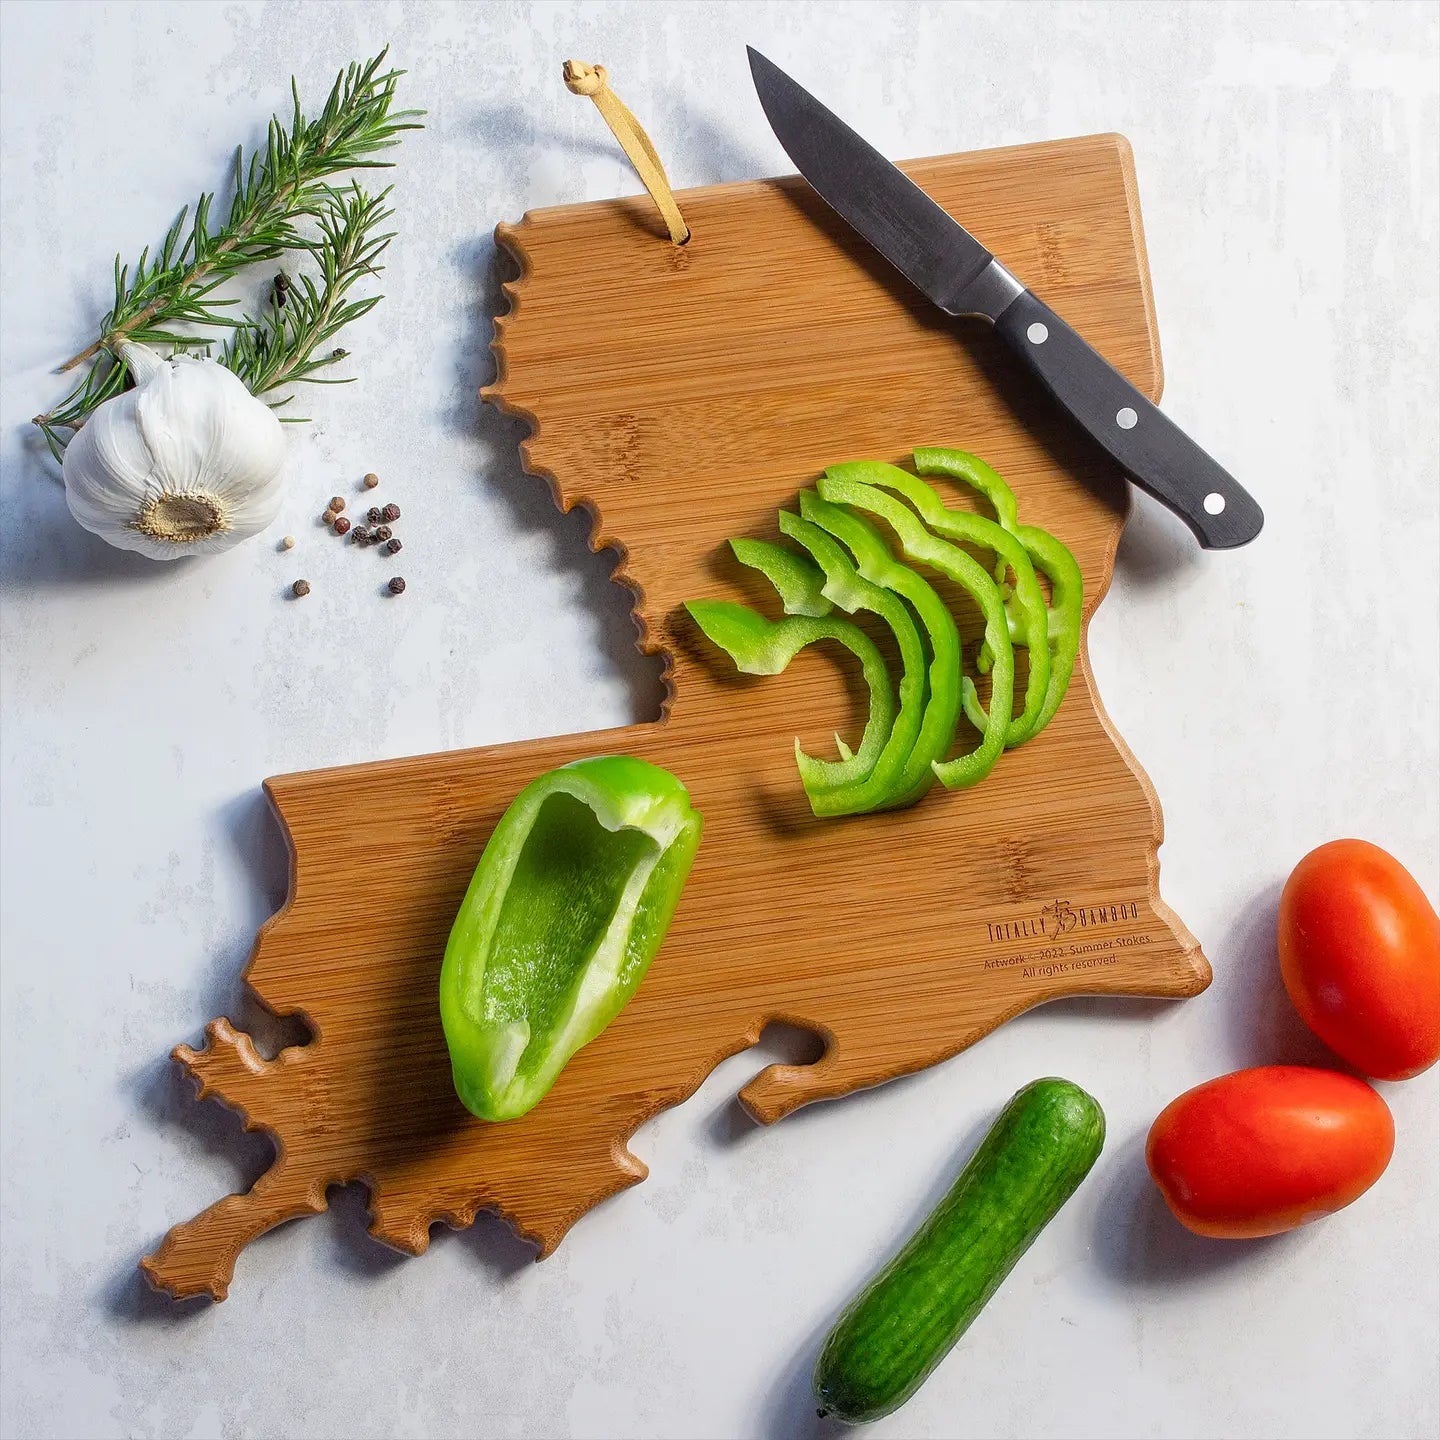 Louisiana Cutting Board with Artwork By Summer Stokes